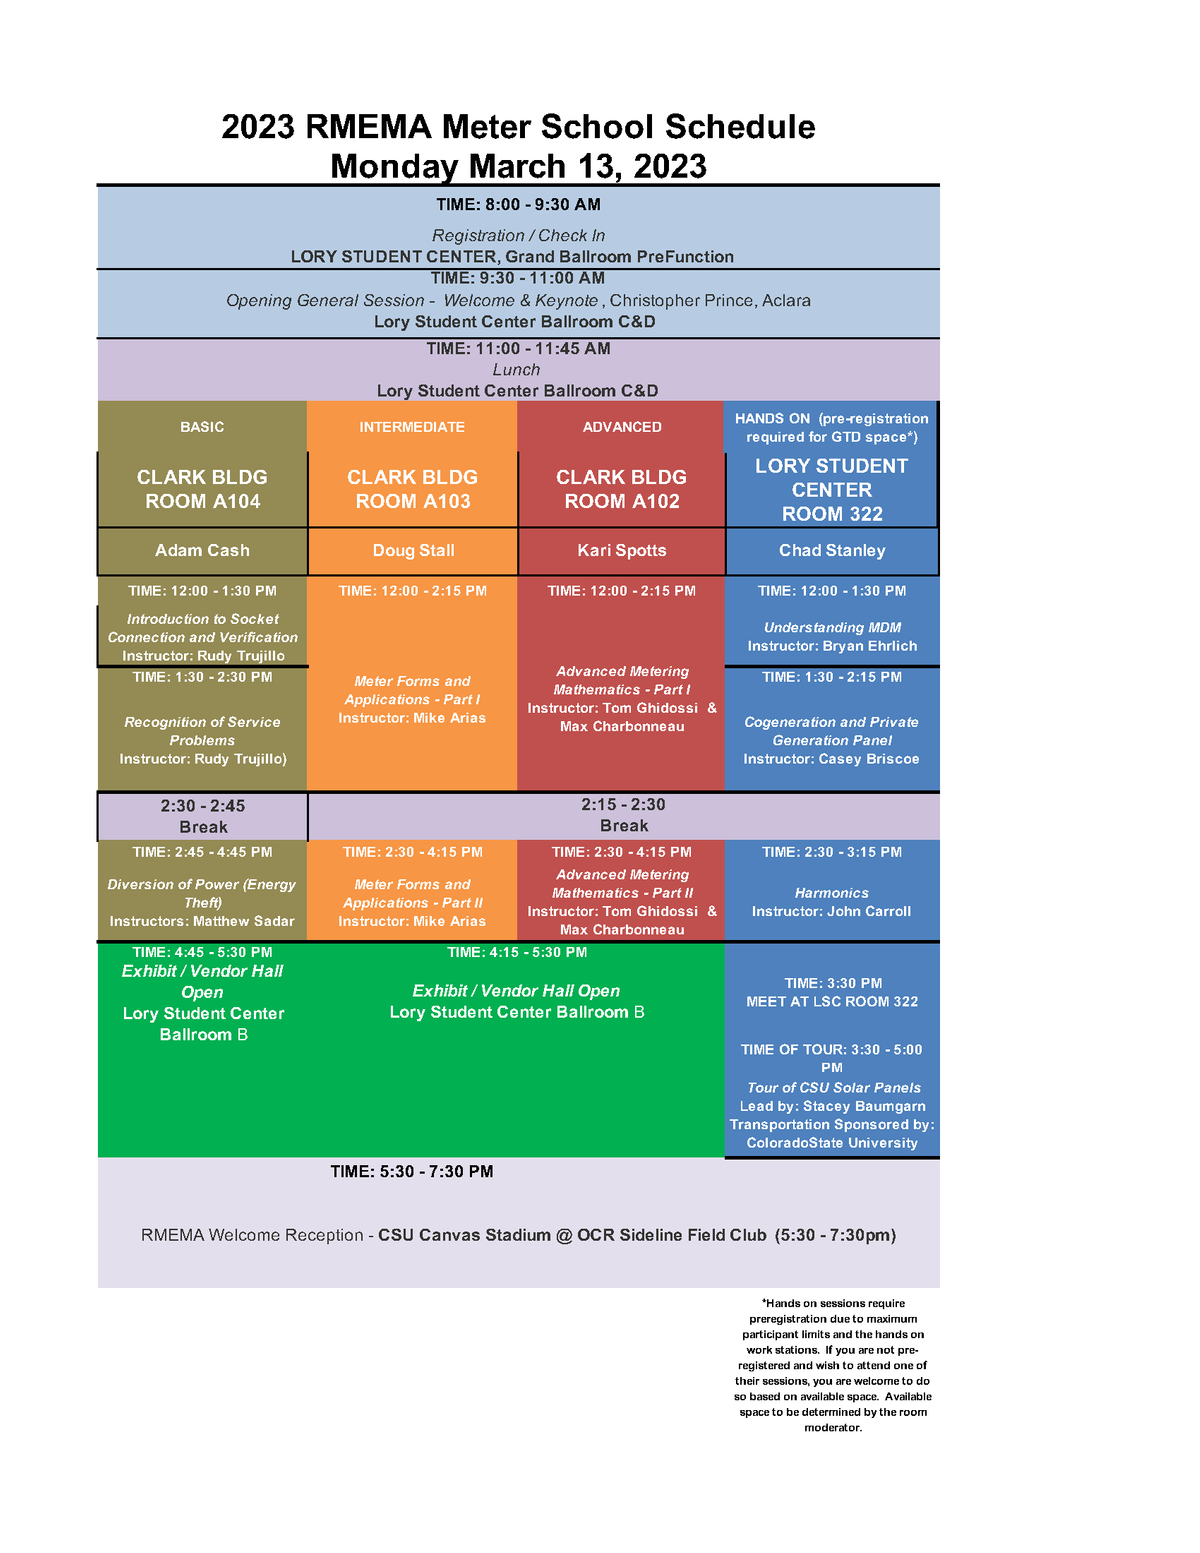 RMEMA 2023 Schedule at a glance - Mon 3.13.23.png